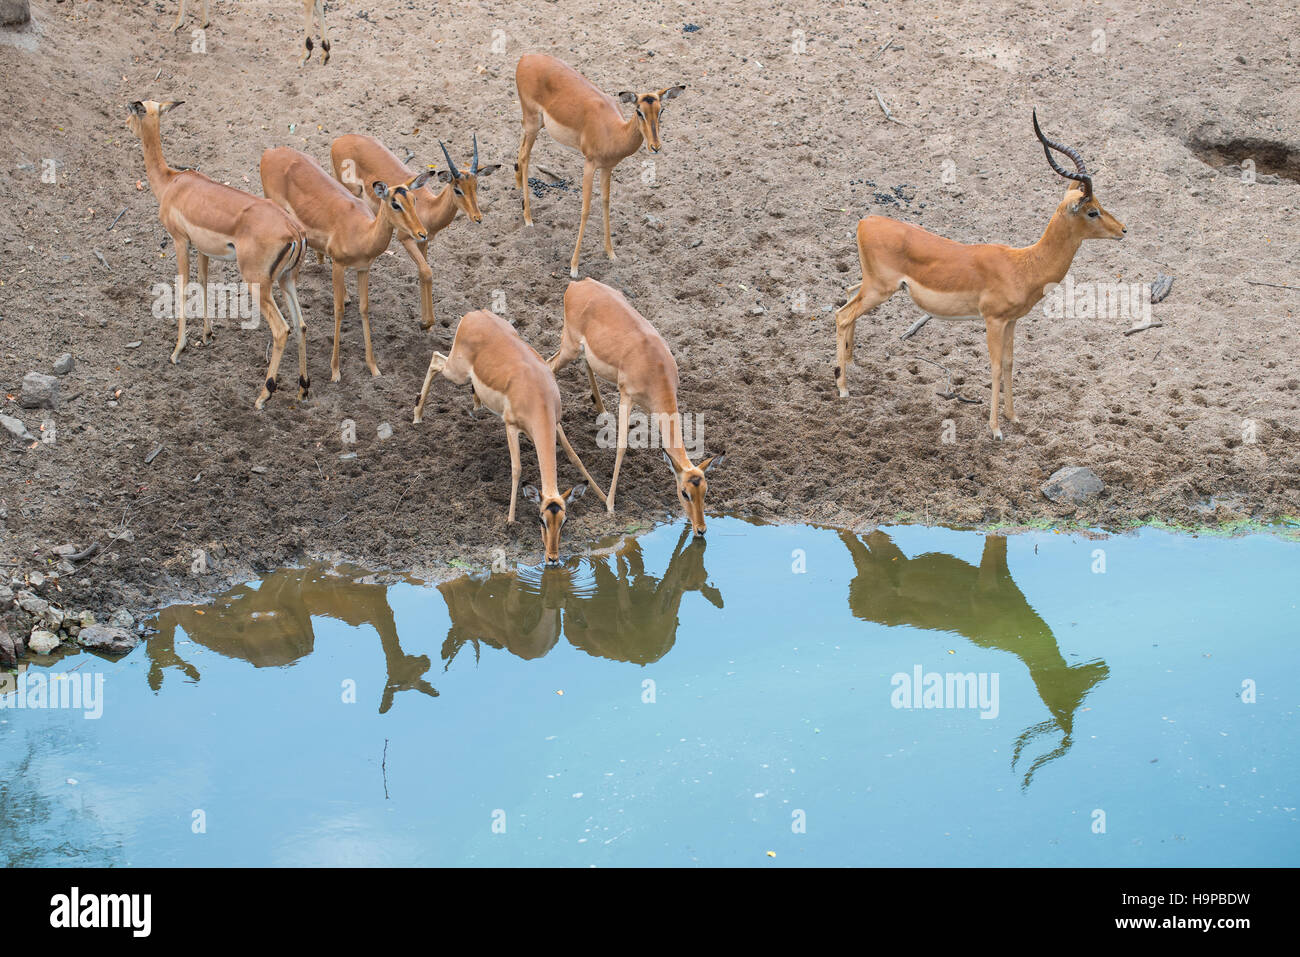 Impalas drinking from a dam with their reflections visible Stock Photo